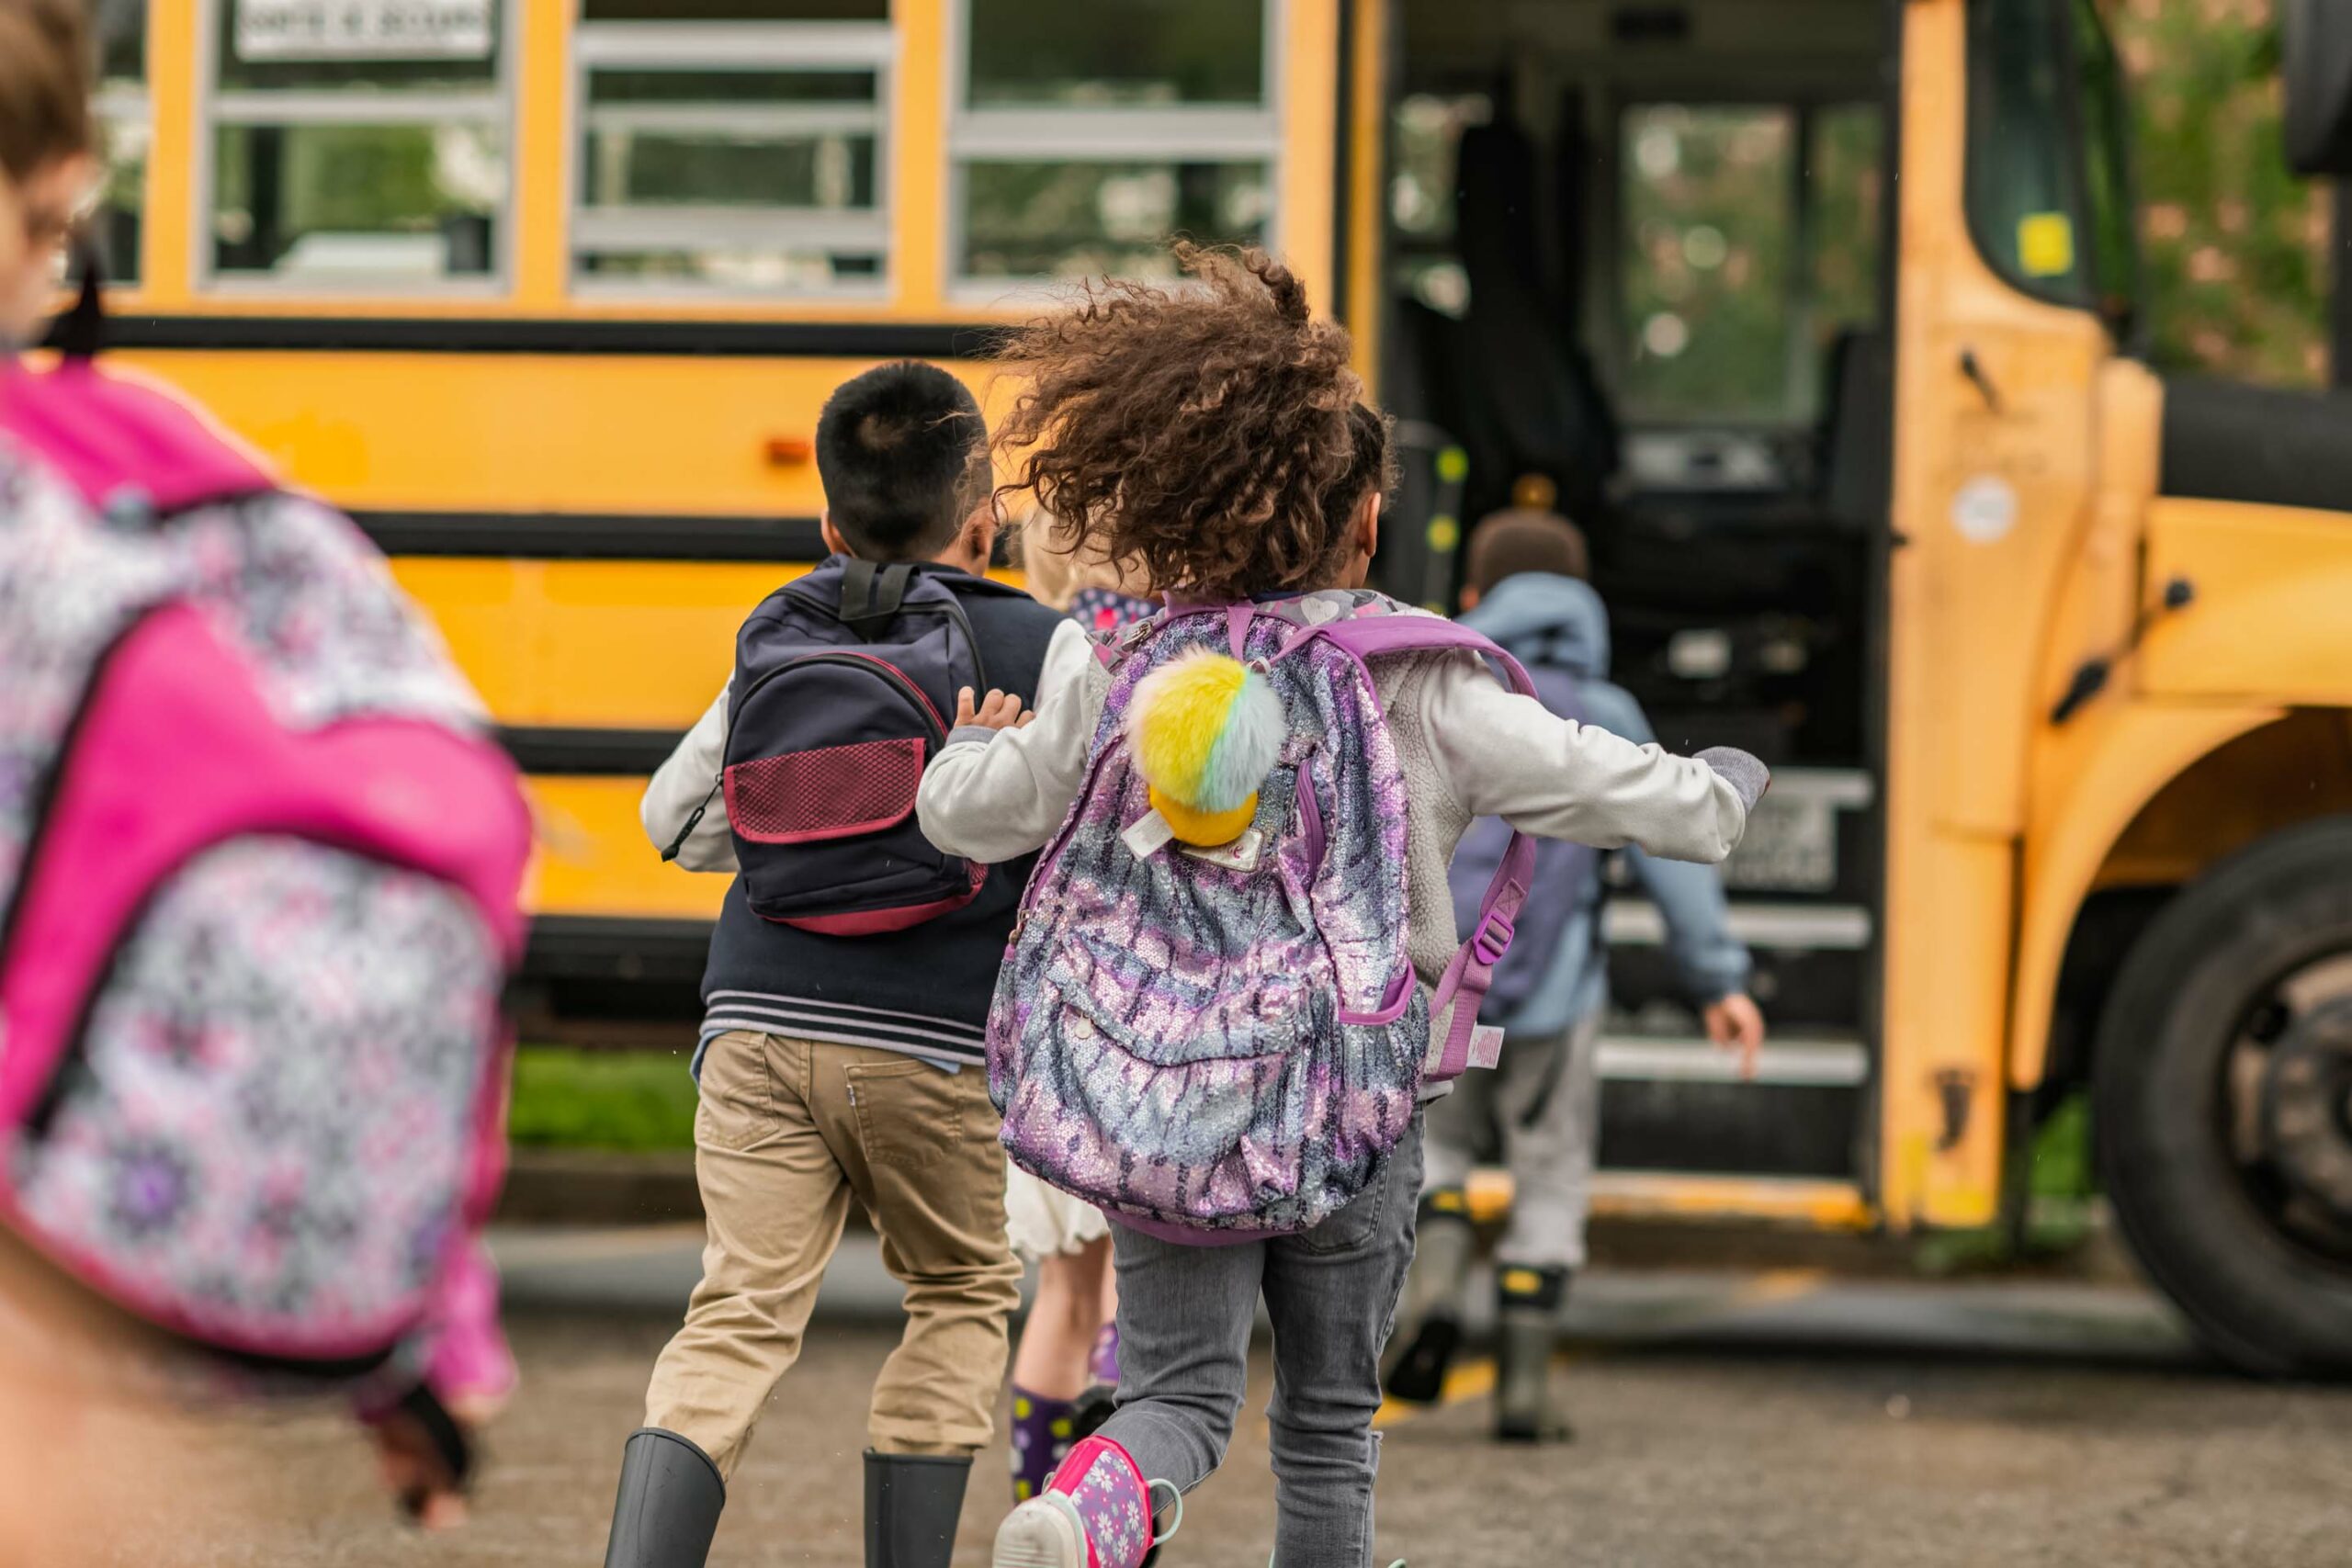 Children wearing backpacks are excitedly running towards a yellow school bus. The bus has an open door, and other children are seen boarding. The scene suggests a school day, with energetic movement from the group of kids.